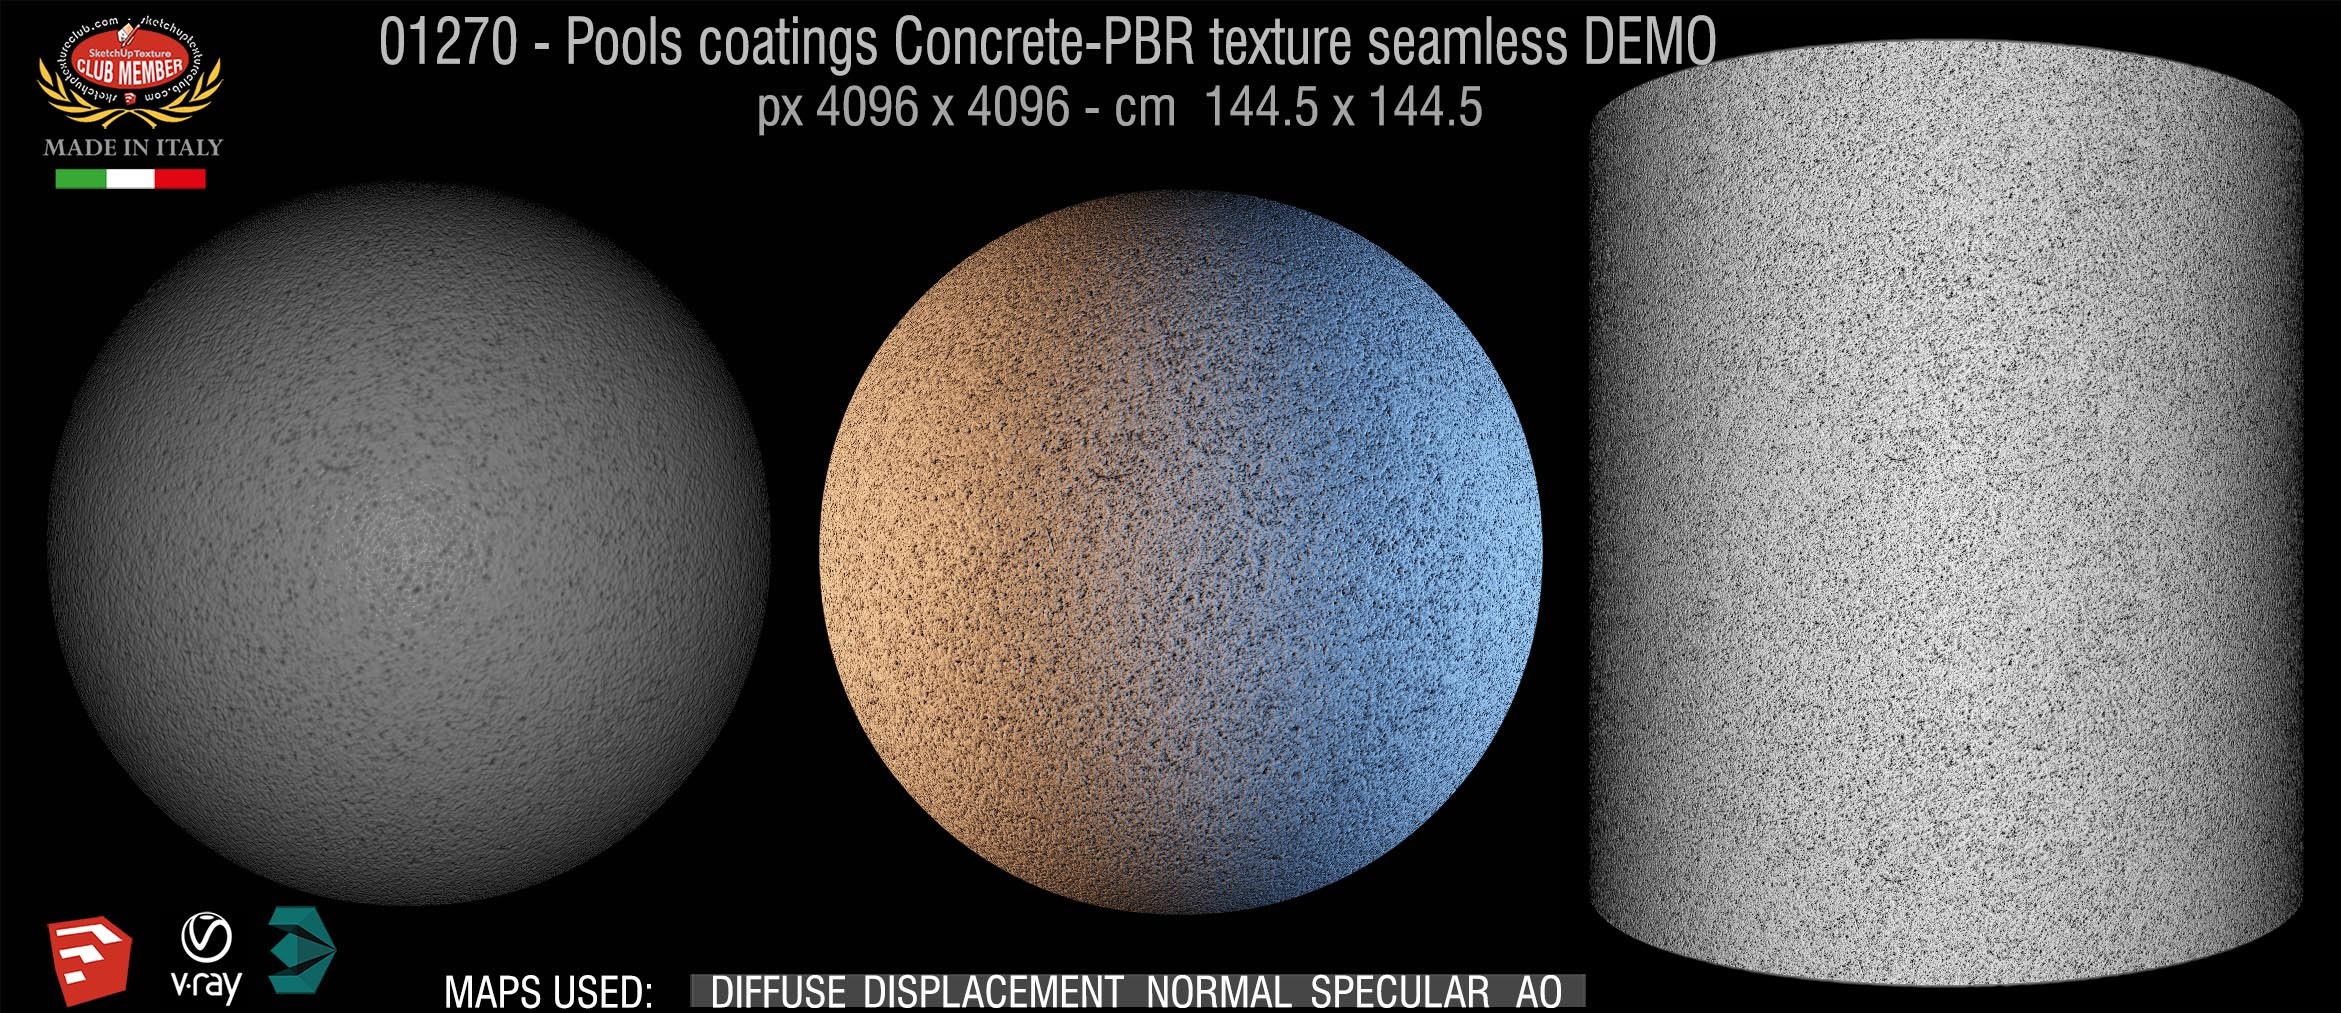 01270 Pools coatings Concrete-PBR texture seamless DEMO